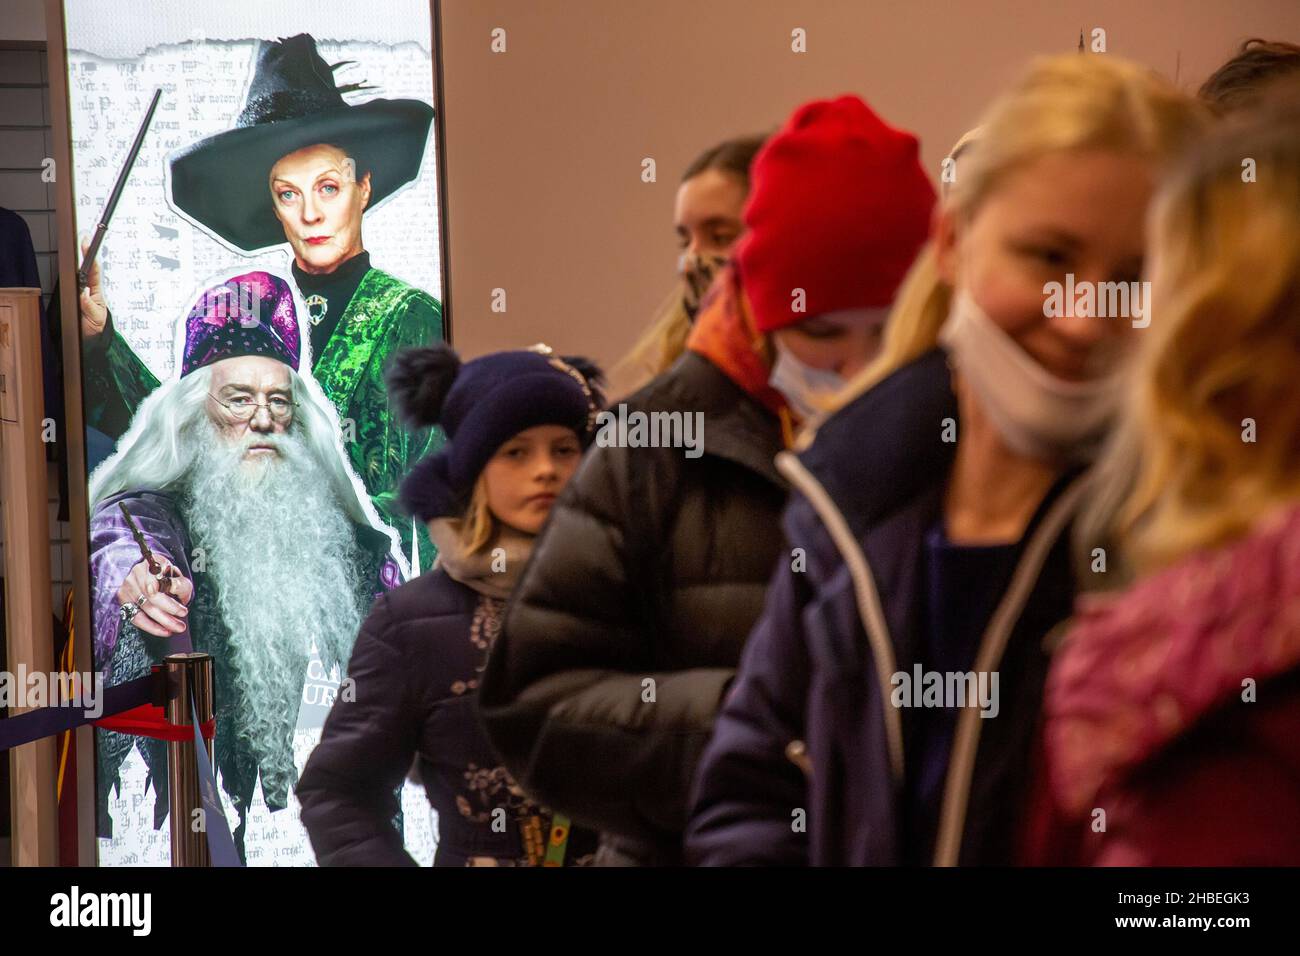 Moscow, Russia. 19th December, 2021 People stay in a queue at the Harry Potter pop-up shop at the Central Children's Store in Lubyanka Square in Moscow; the store sells Harry Potter branded toys, stationery, clothing, souvenirs, sweets and other merchandise Stock Photo